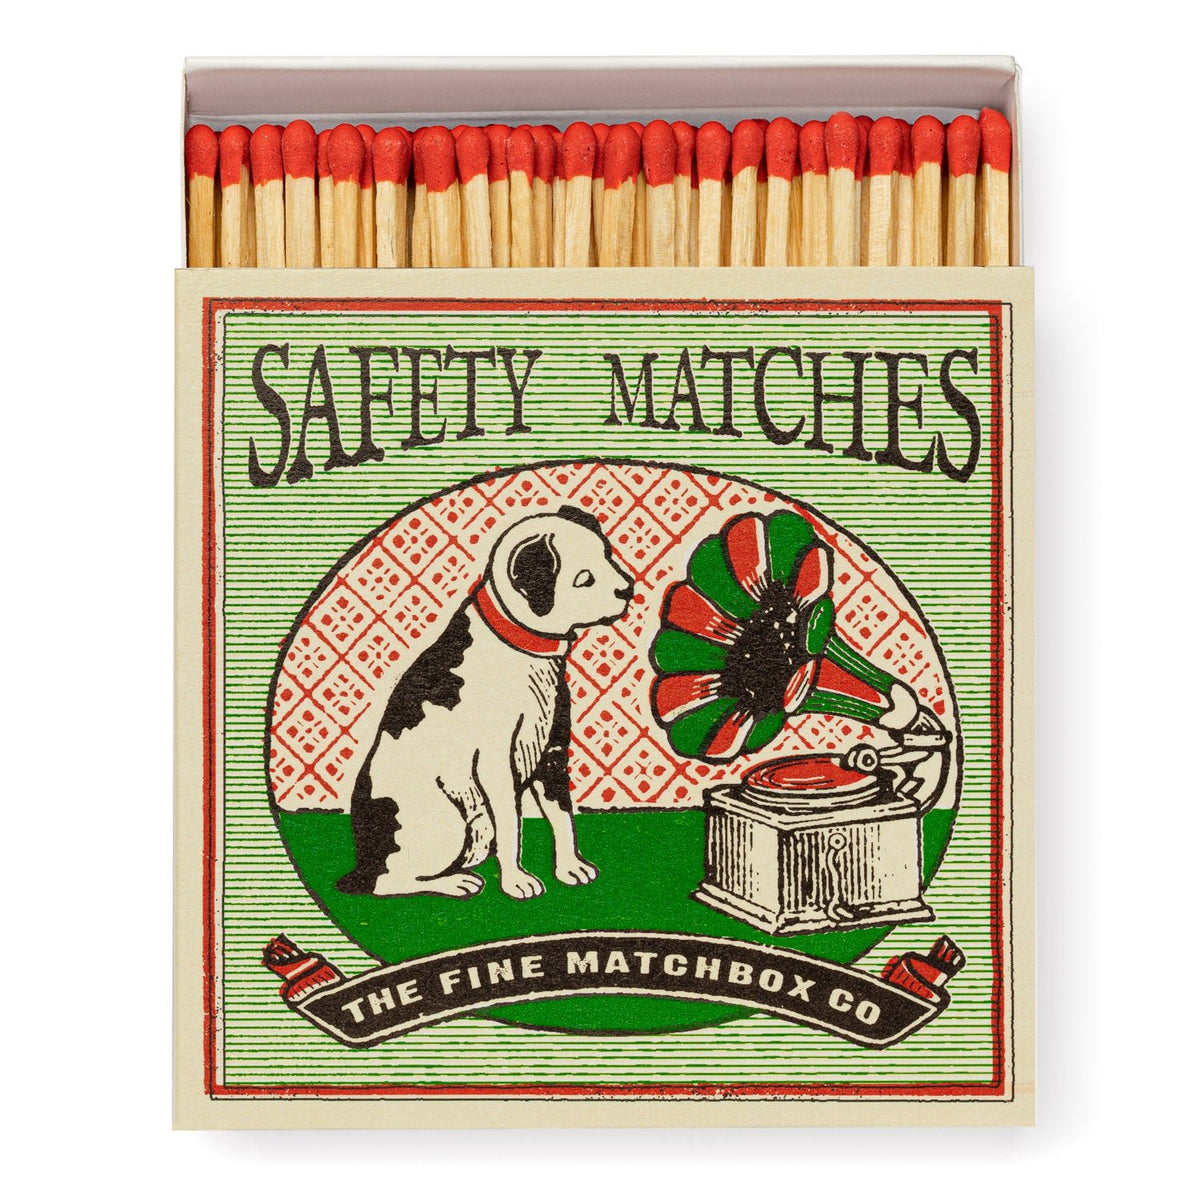 Dog and Gramaphone Luxury Archivist Matches - The Mewstone Candle Co